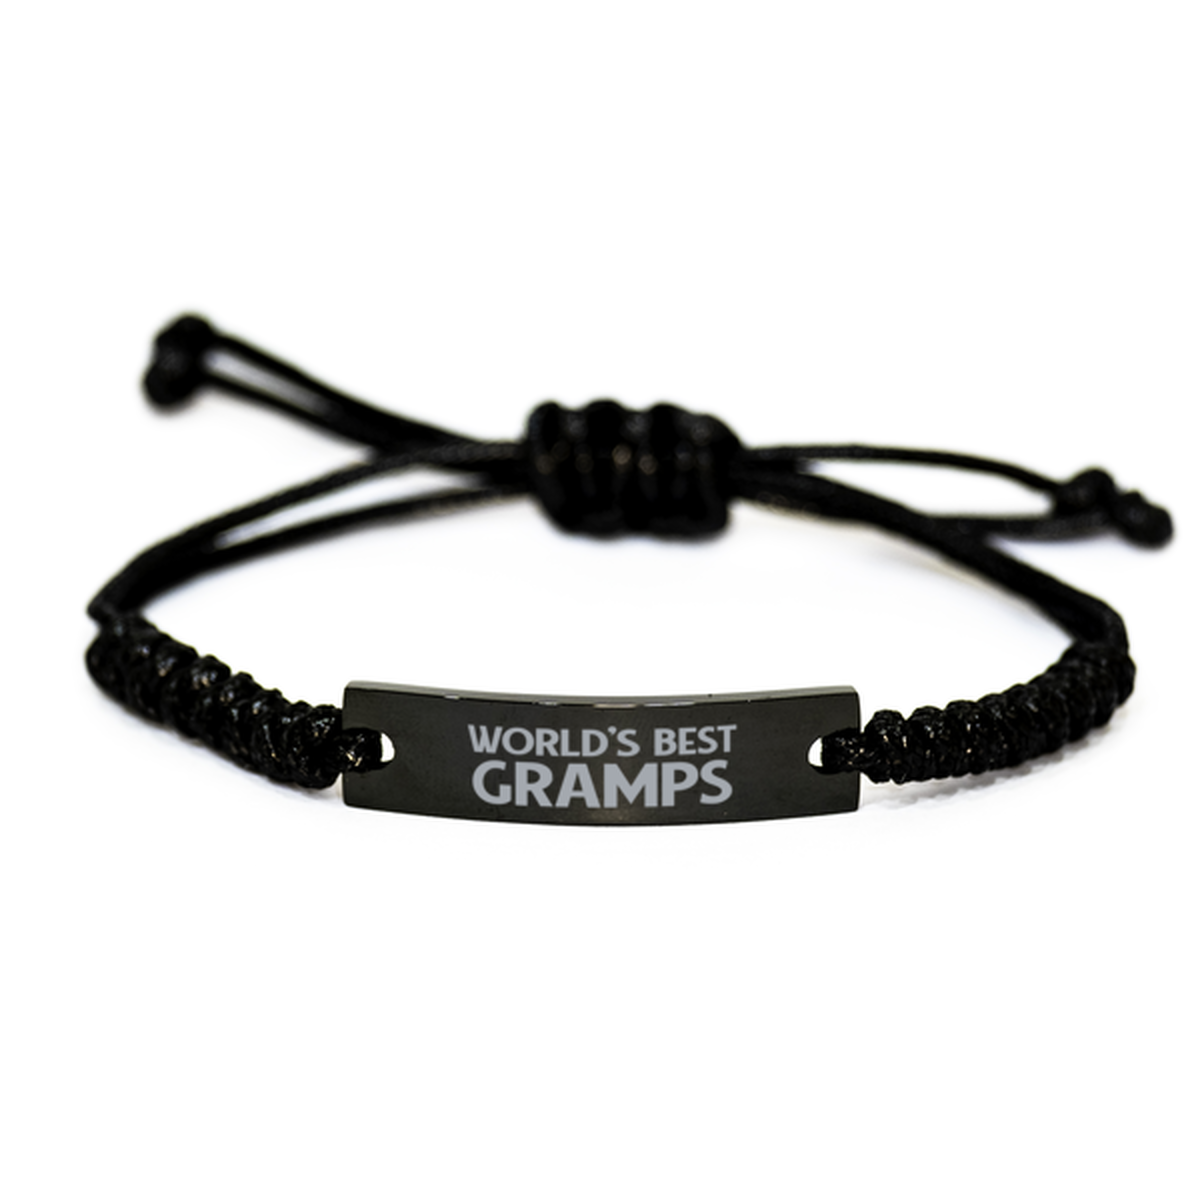 World's Best Gramps Gifts, Funny Engraved Rope Bracelet For Gramps, Birthday Family Gifts For Women